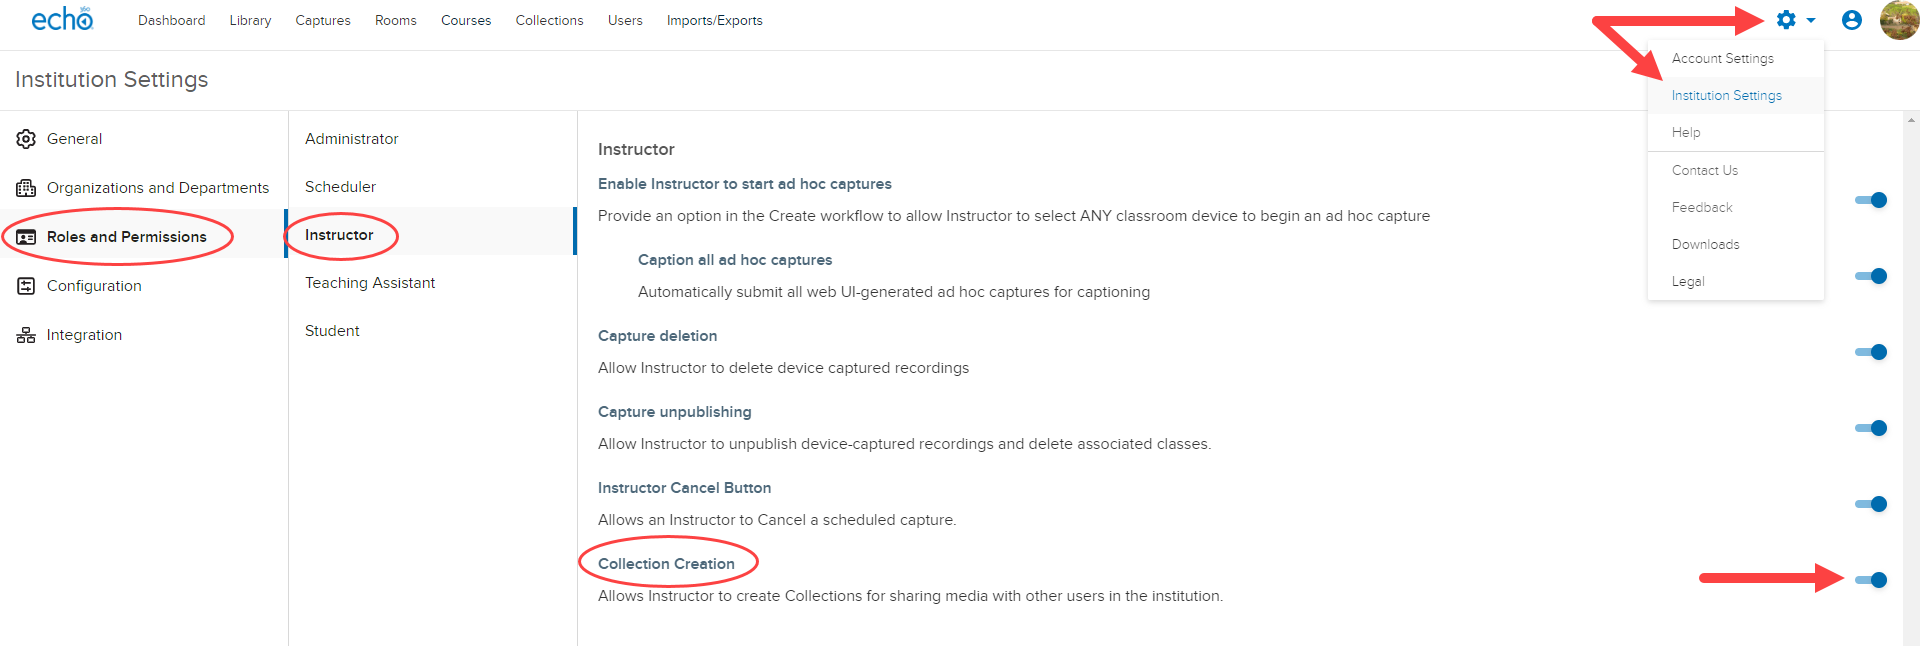 Content Creation toggle enabled for User in Roles and Permissions under Institution Settings